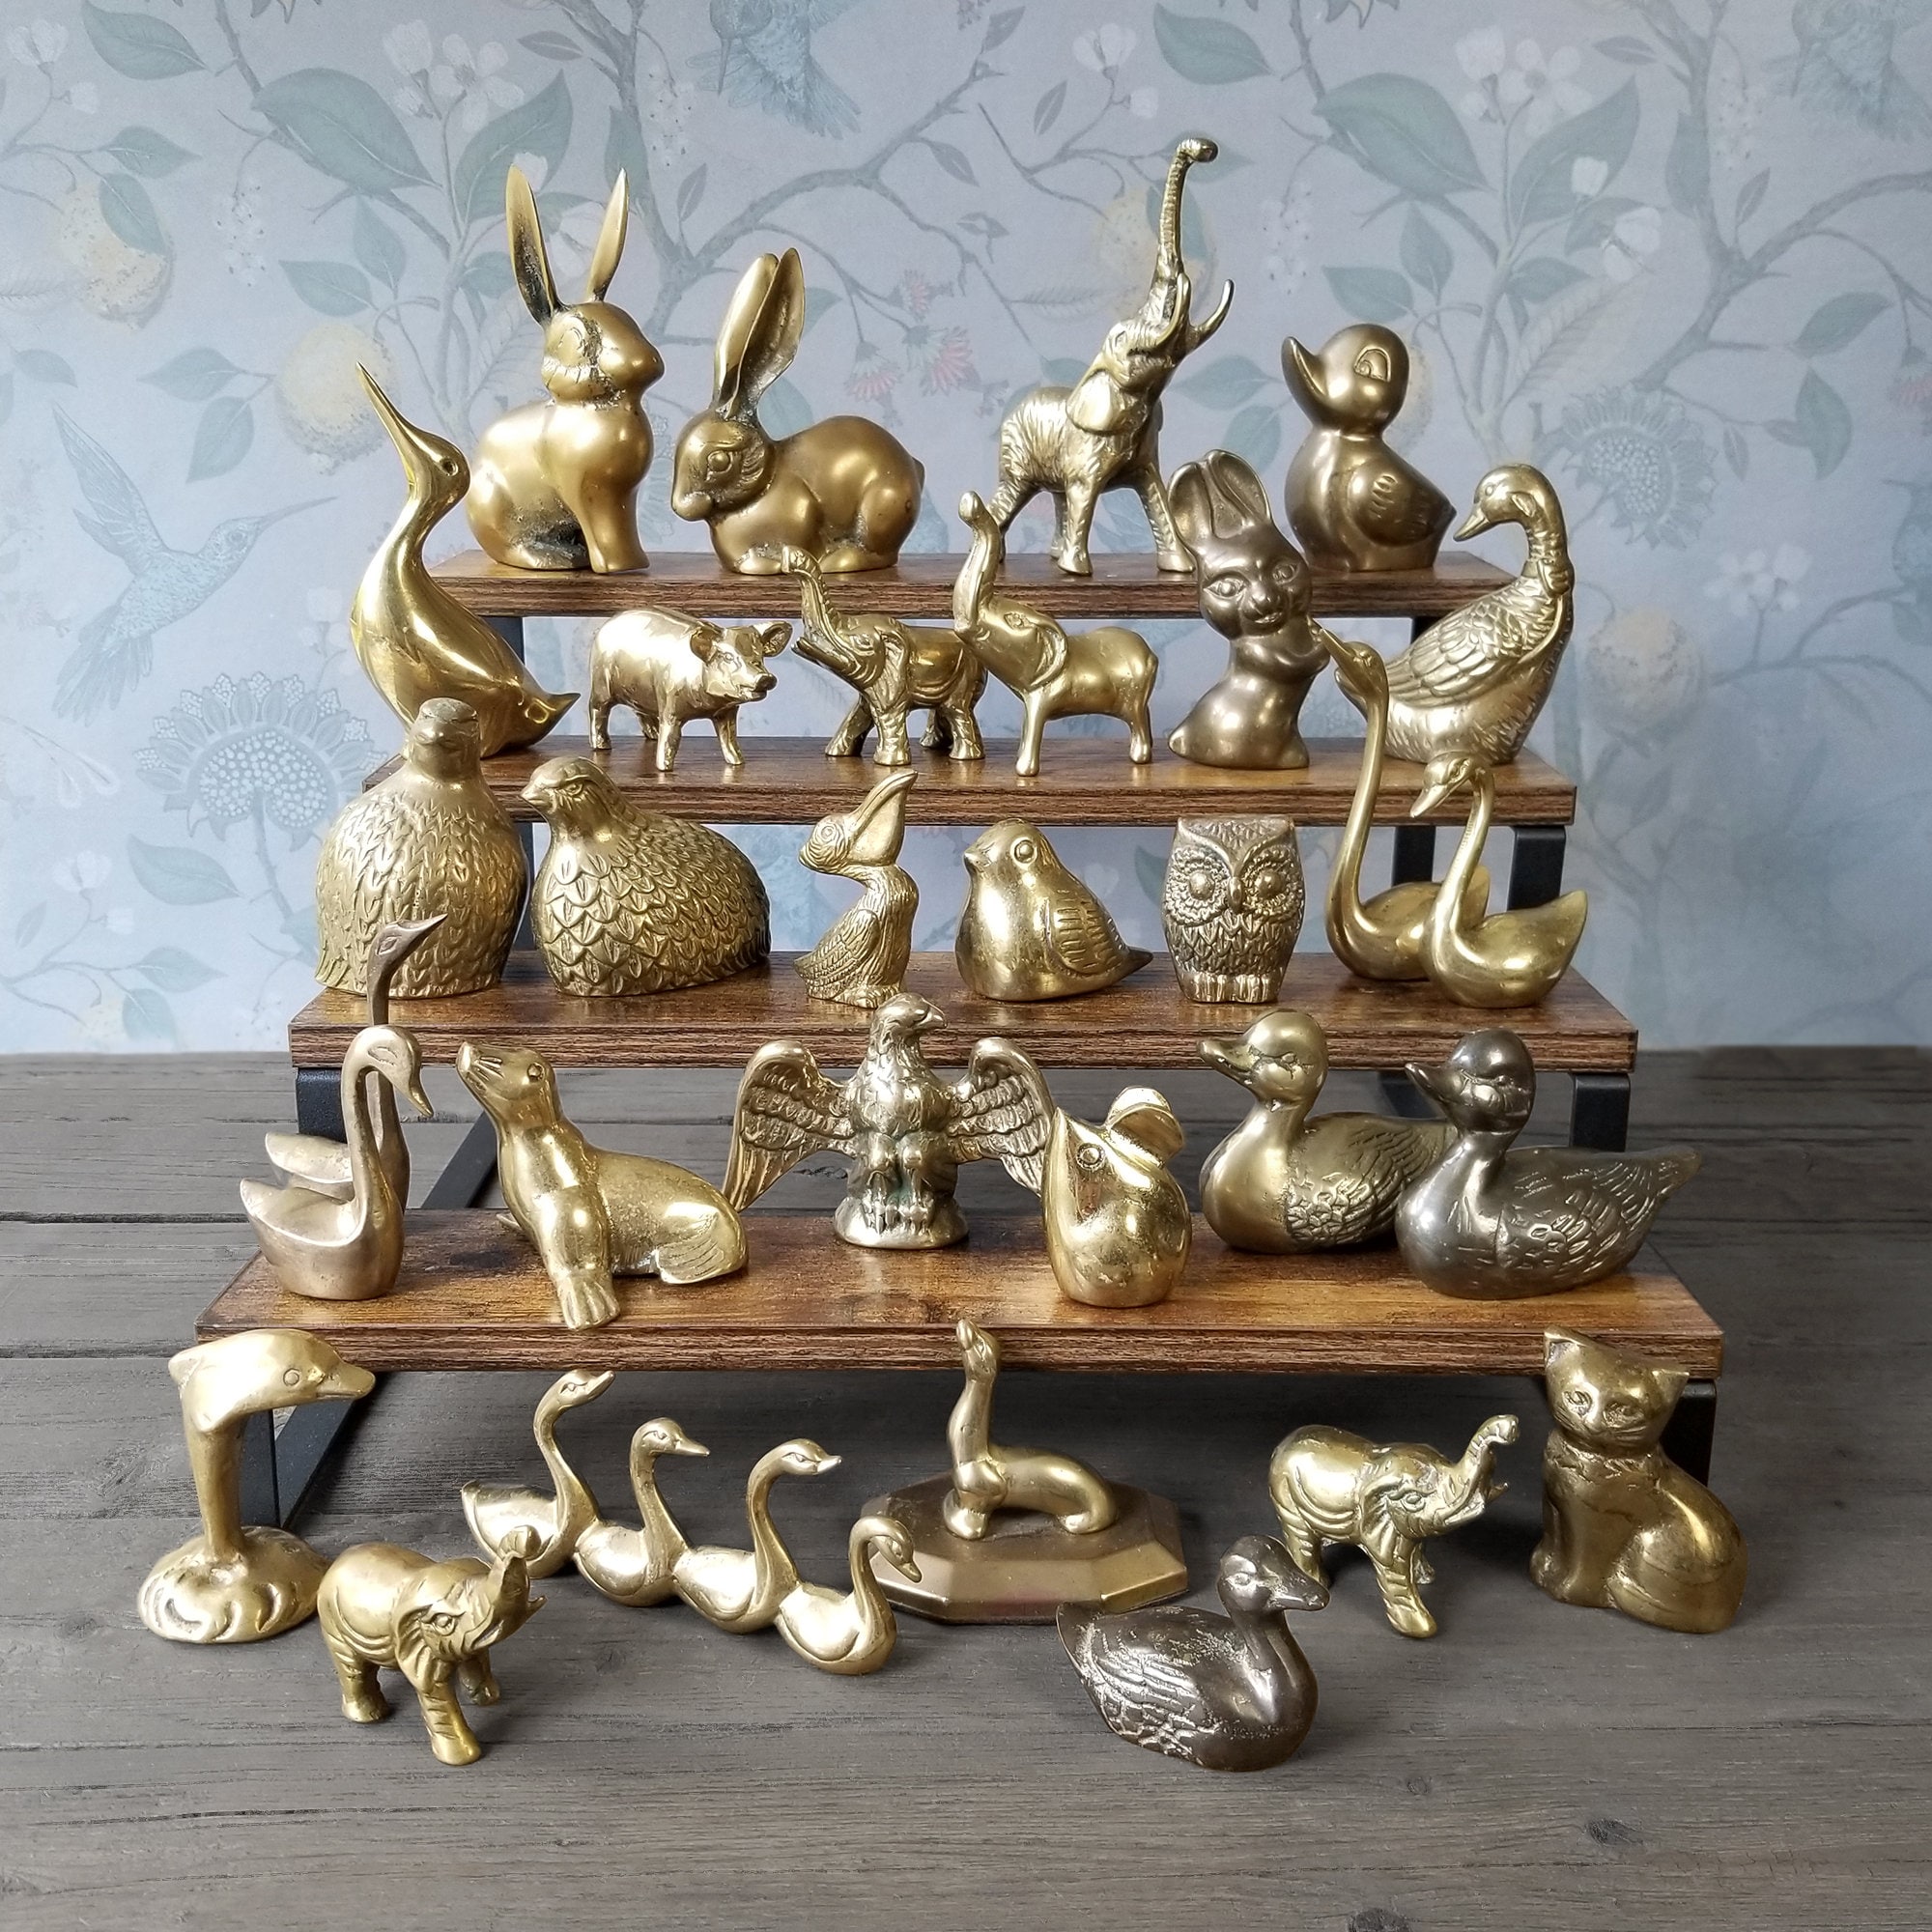 Assorted Brass Animal Figurines - Bunny Rabbits, Quail, Owl, Elephants,  Pigs, Ducks, Swans, Pelican, & More - Sold Separately